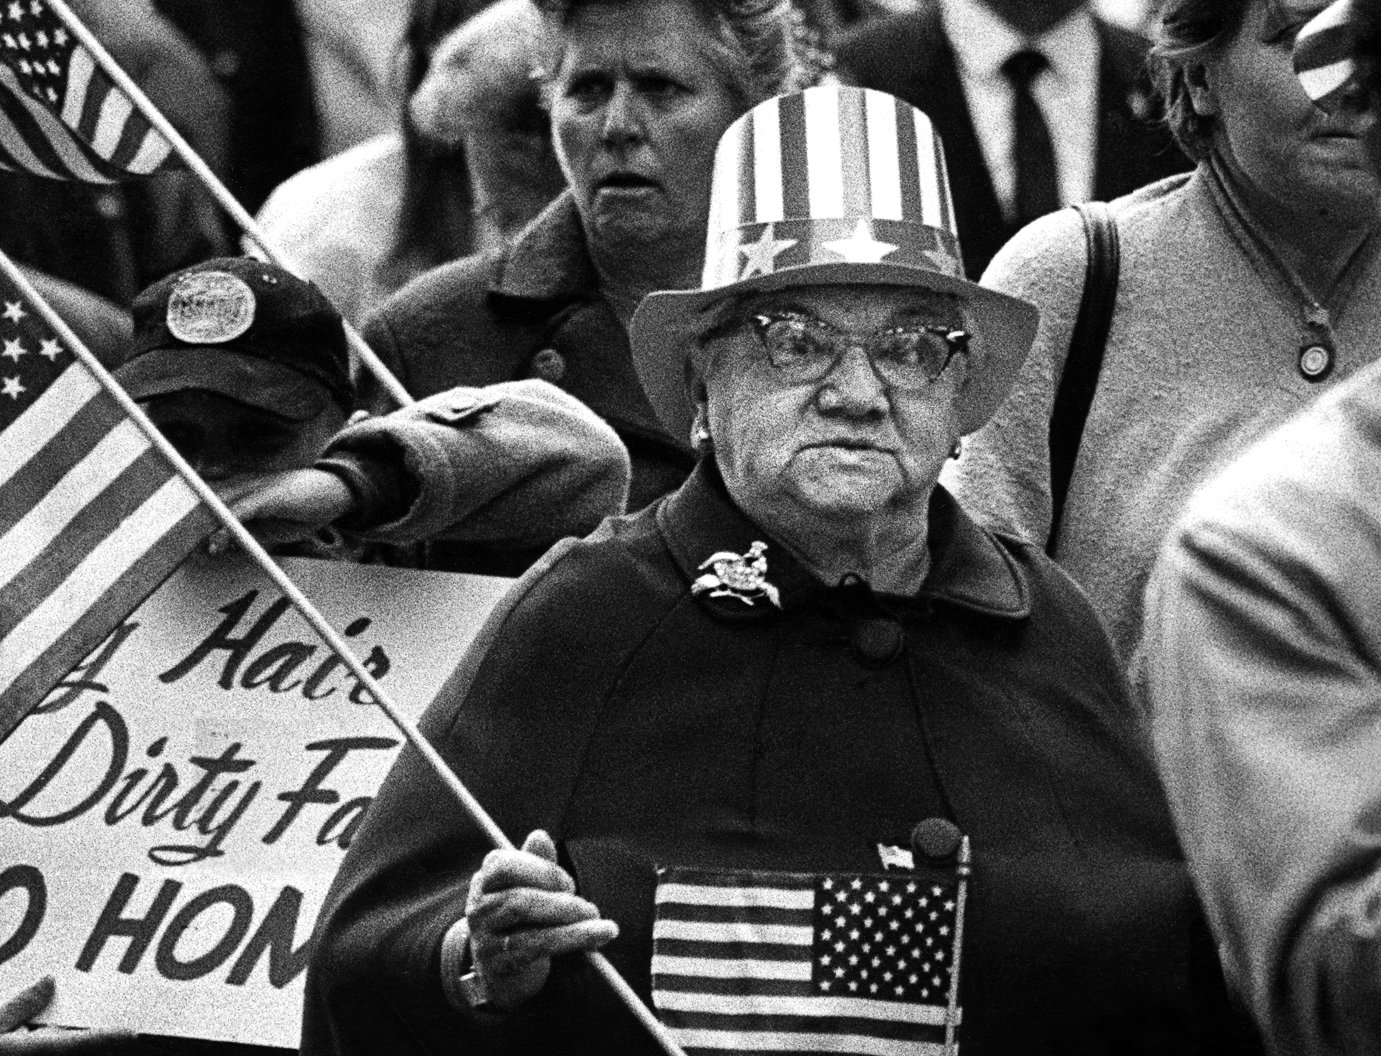  American Grandmother 1970 - A pro-America rally in Syracuse, NY with hundreds of marchers , after thousands of anti-Vietnam war protesters had demonstrated a few weeks earlier. 